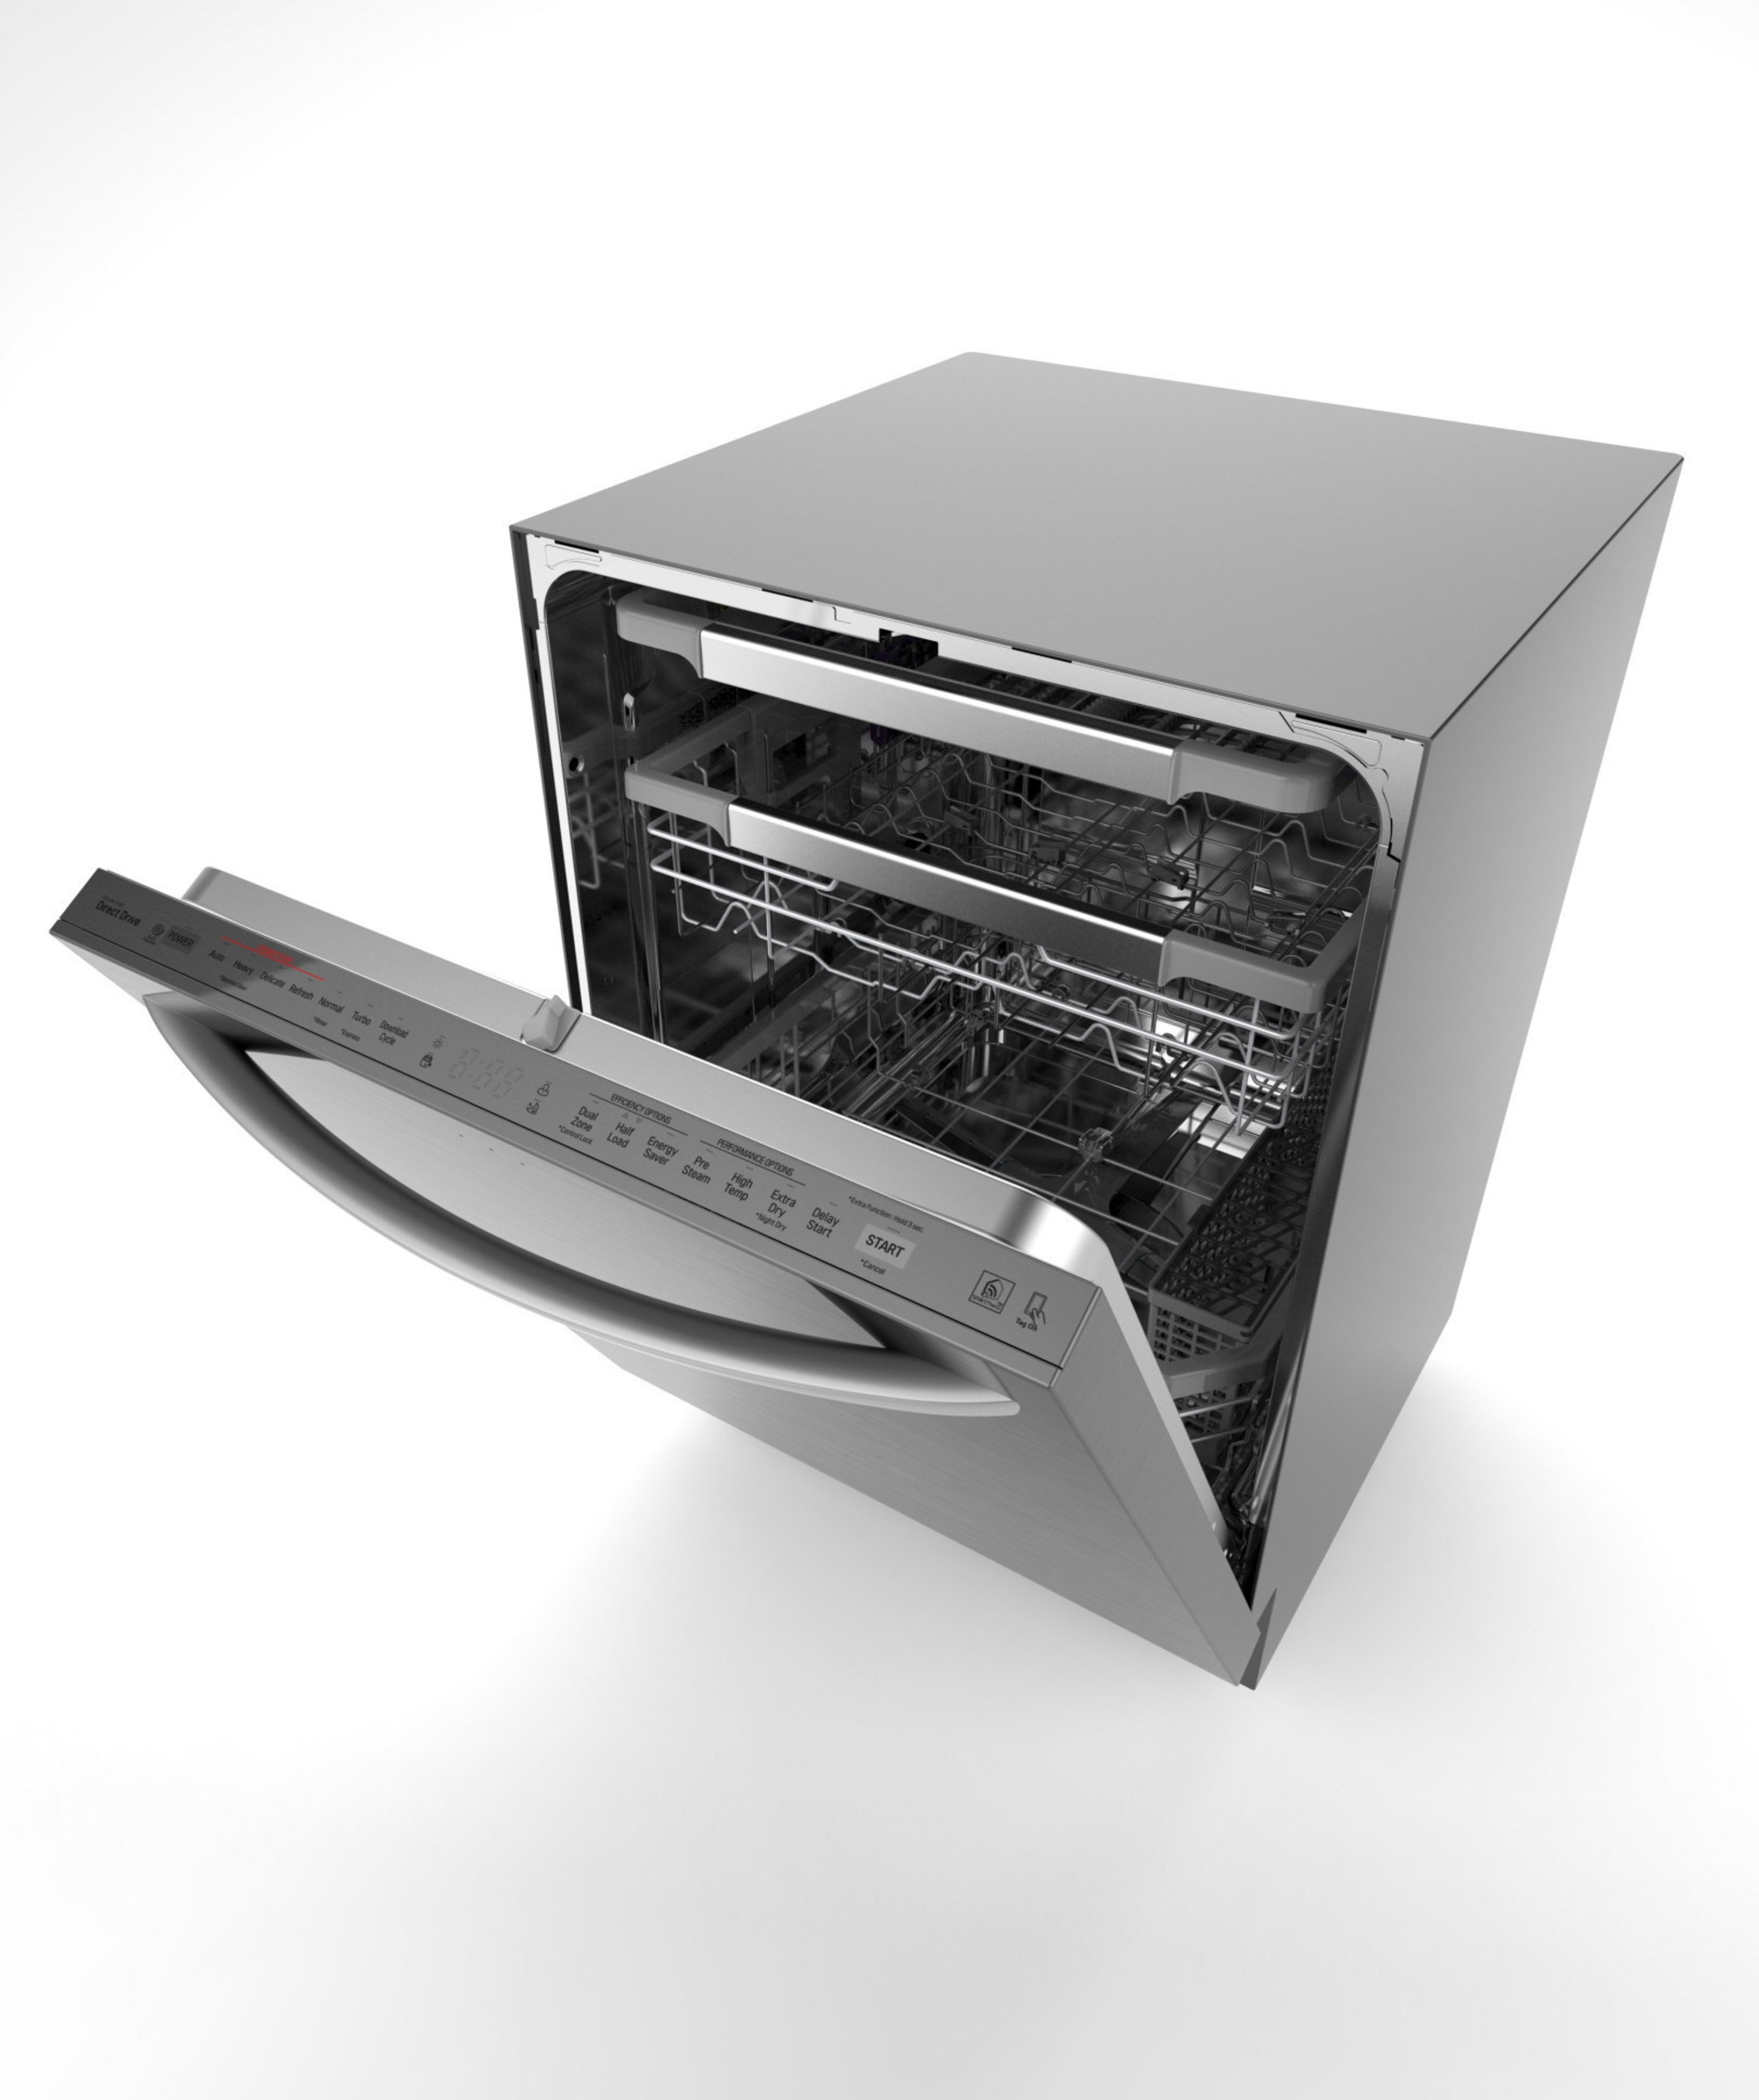 LG To Unveil New Dishwasher Loaded With 